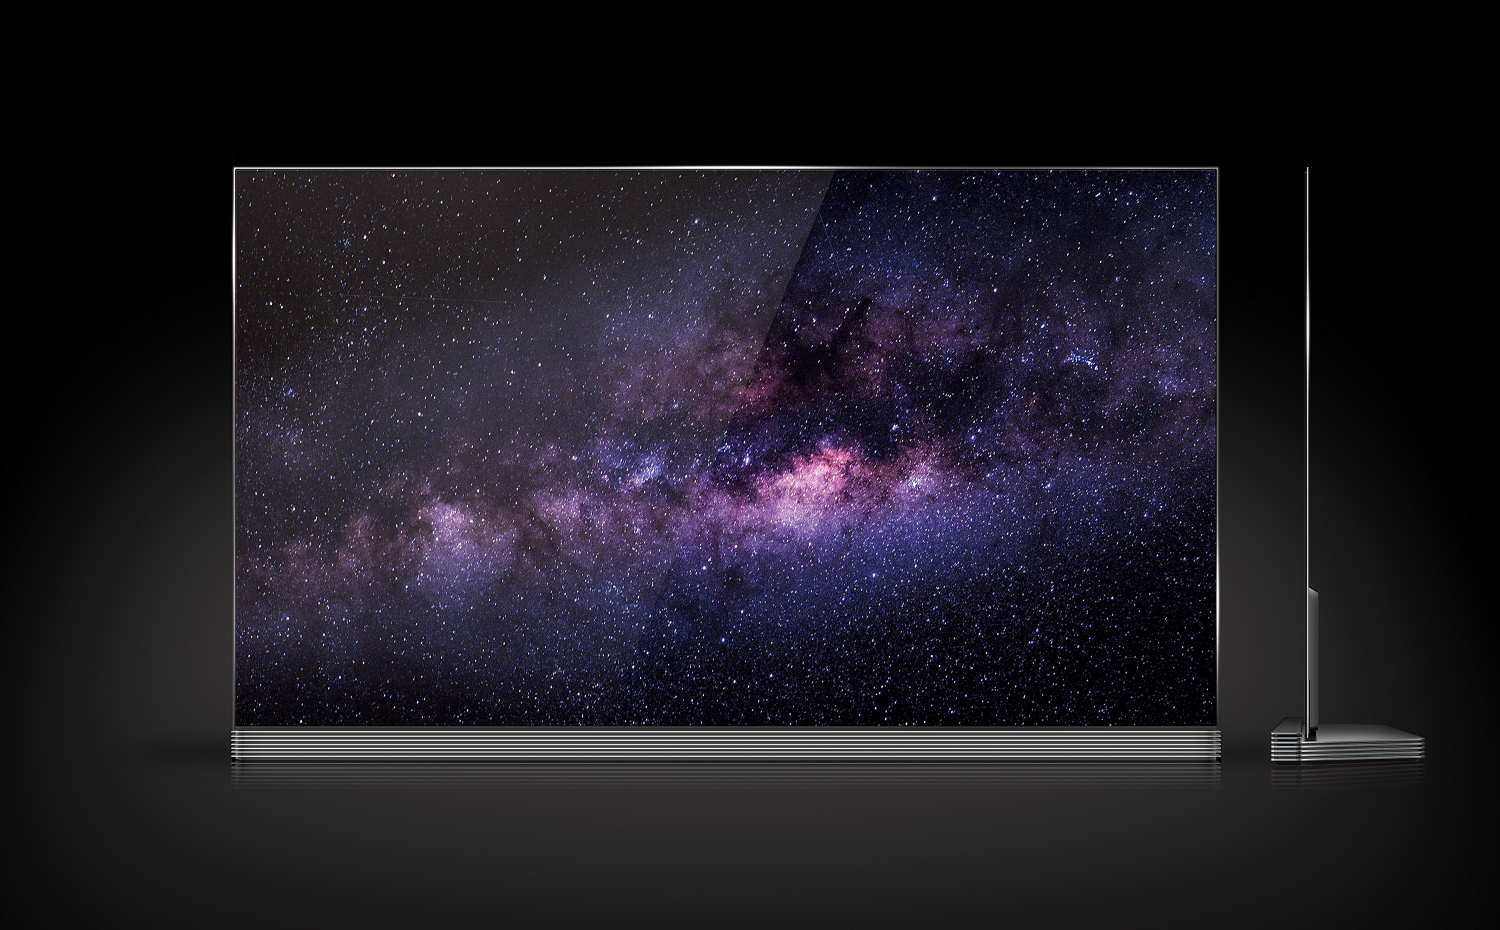 LG Electronics' flagship 2016 LG SIGNATURE OLED TV (model OLED65G6P) is available now for pre-order through participating retail partners, offering consumers a chance to be among the first to bring this revolutionary technology home.